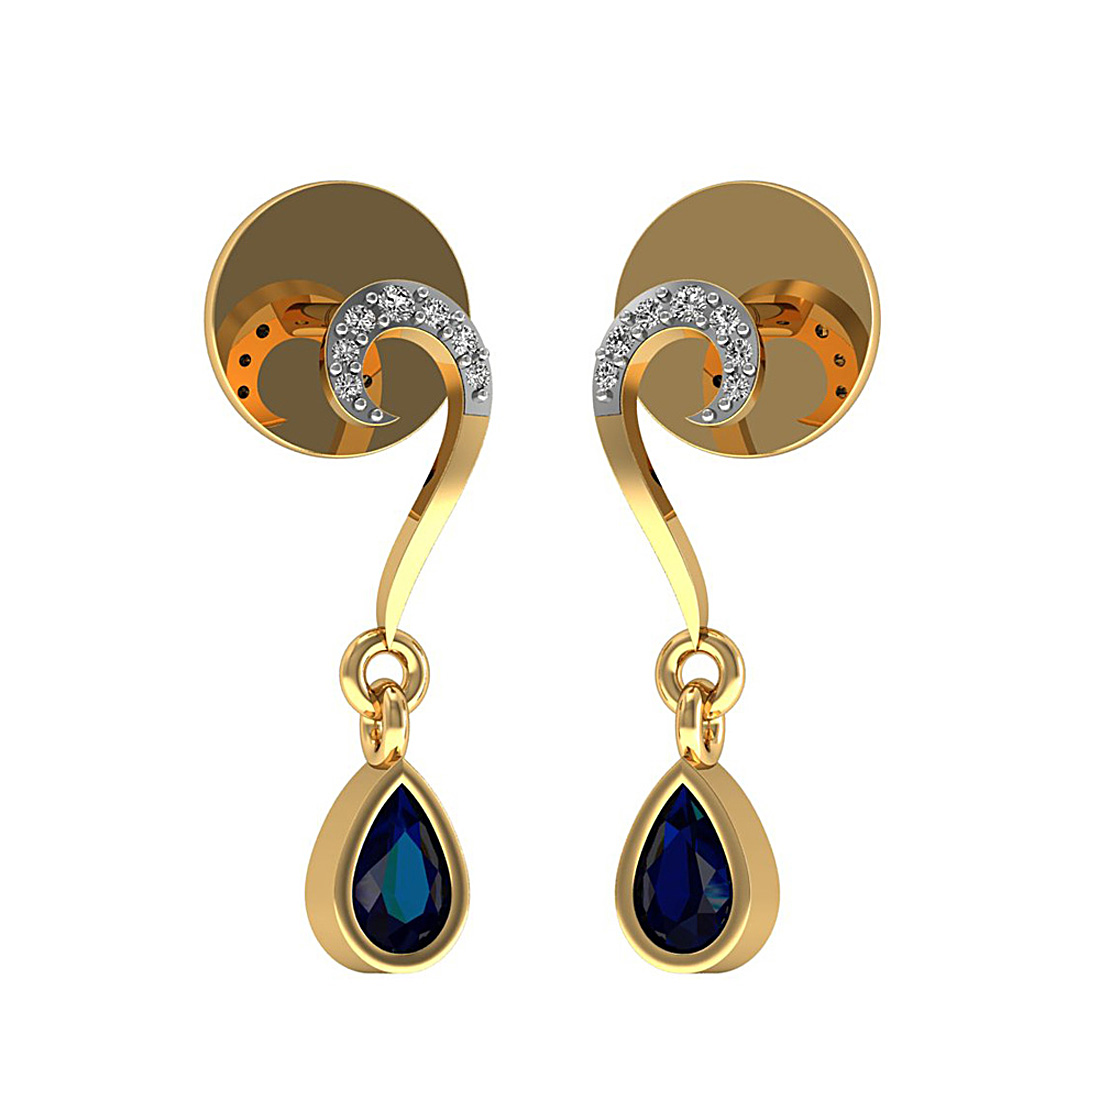 18k solid gold diamond drop stud earrings with blue sapphire